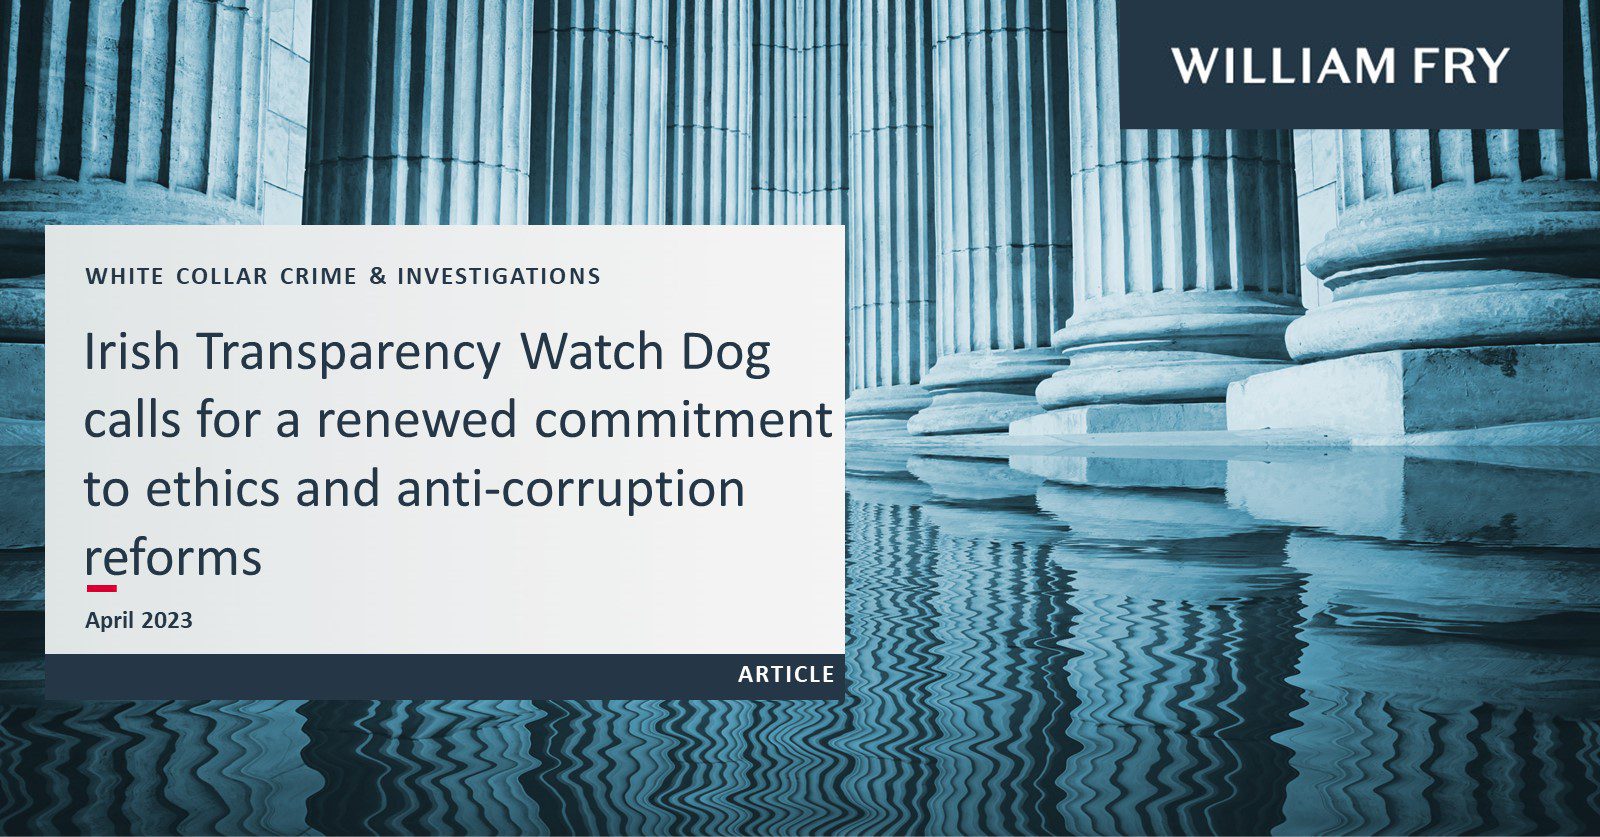 Irish Transparency Watch Dog calls for a renewed commitment to ethics and anti-corruption reforms